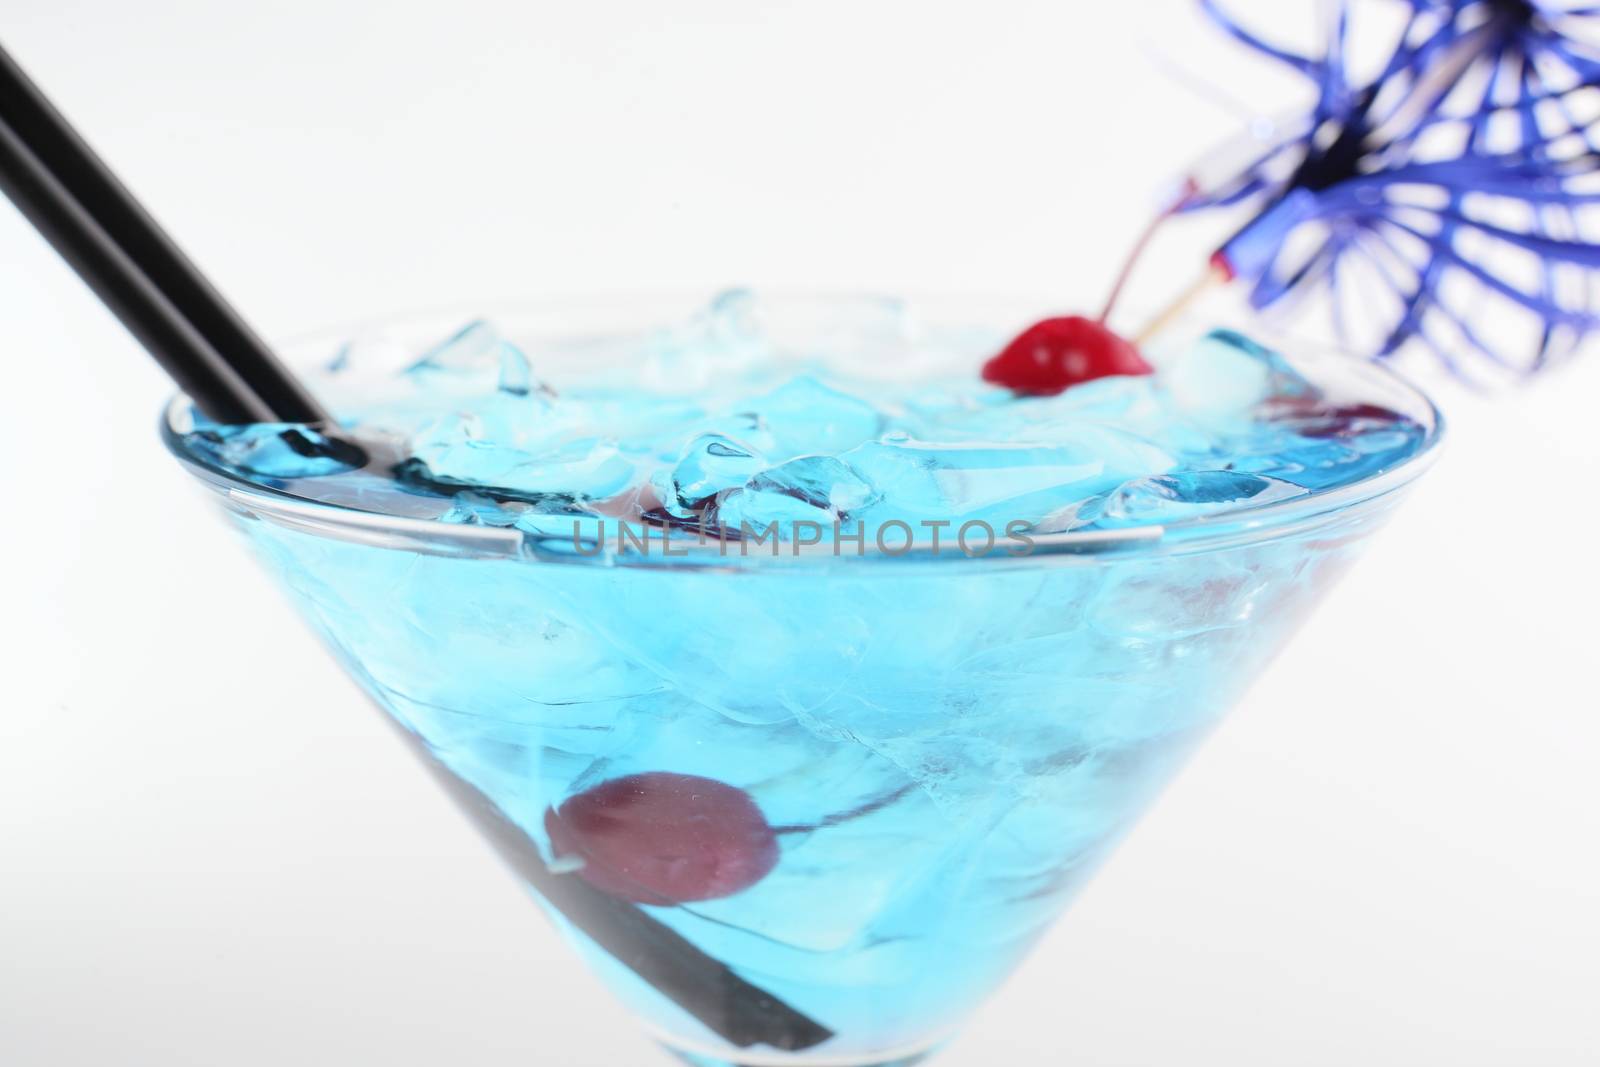 fresh cocktail on white background by fiphoto